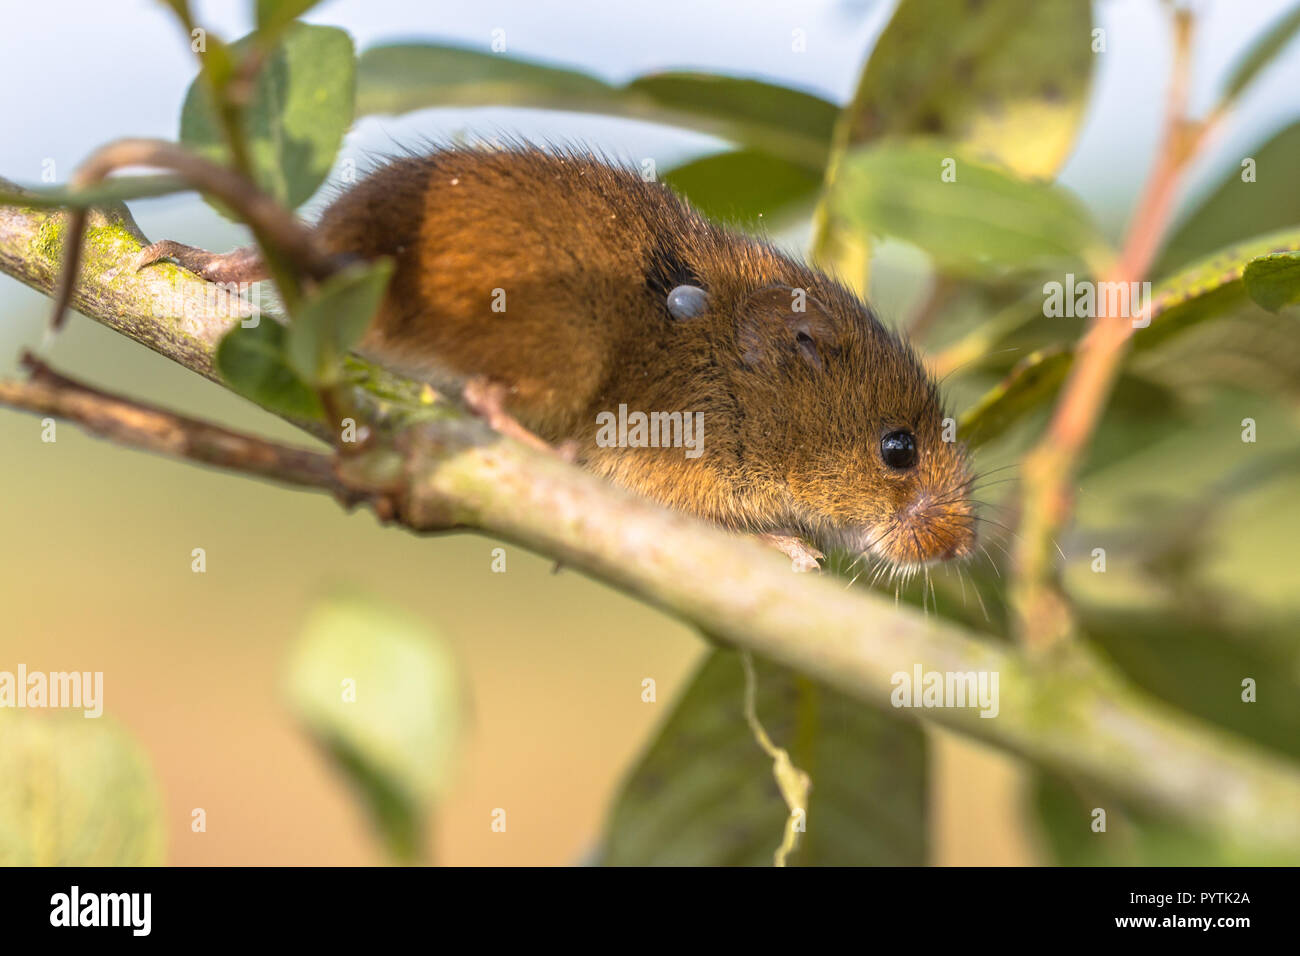 Eurasian Harvest mouse (Micromys minutus) walking on branch with Castor bean Tick (Ixodes ricinus) in its fur. Mice play an important role in the spre Stock Photo